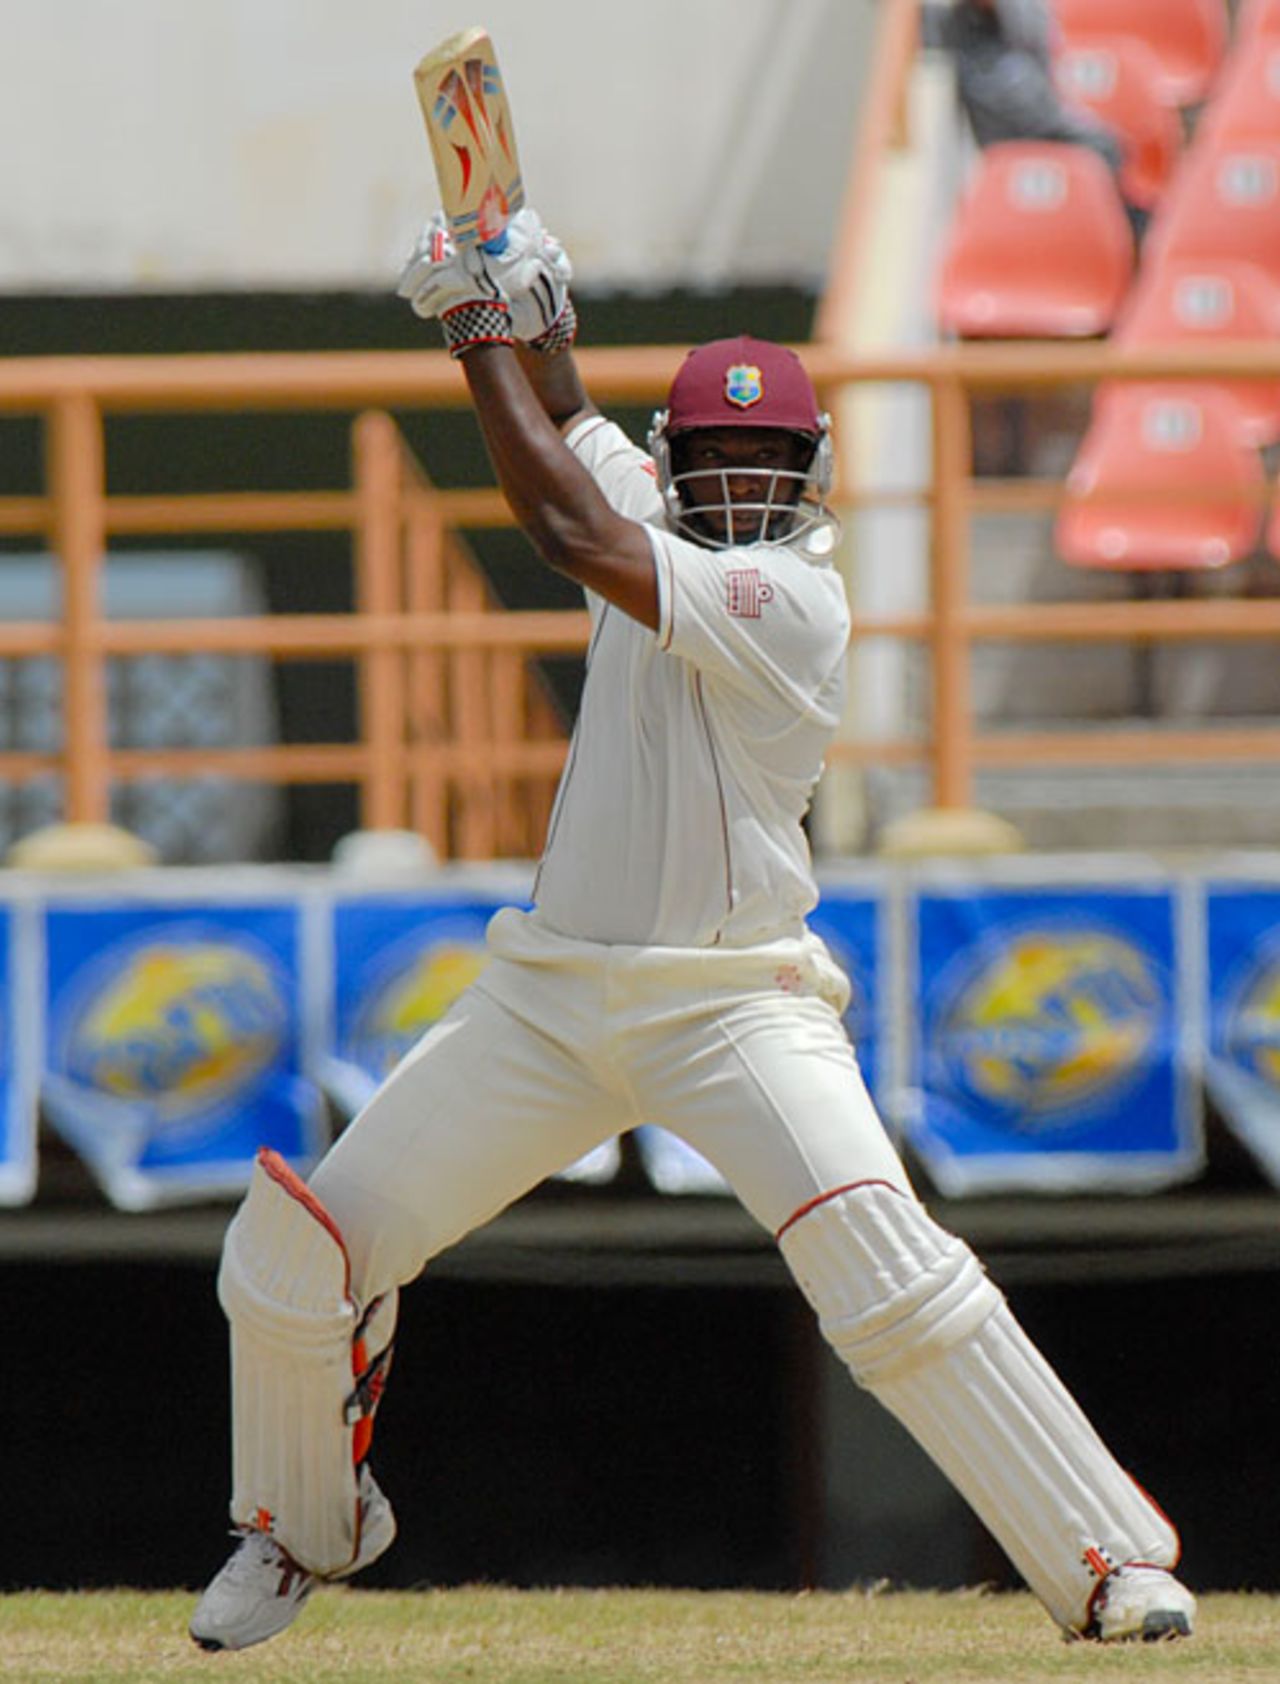 Ryan Hinds square drives, West Indies v Sri Lanka, 1st Test, Guyana, 3rd day, March 24, 2008